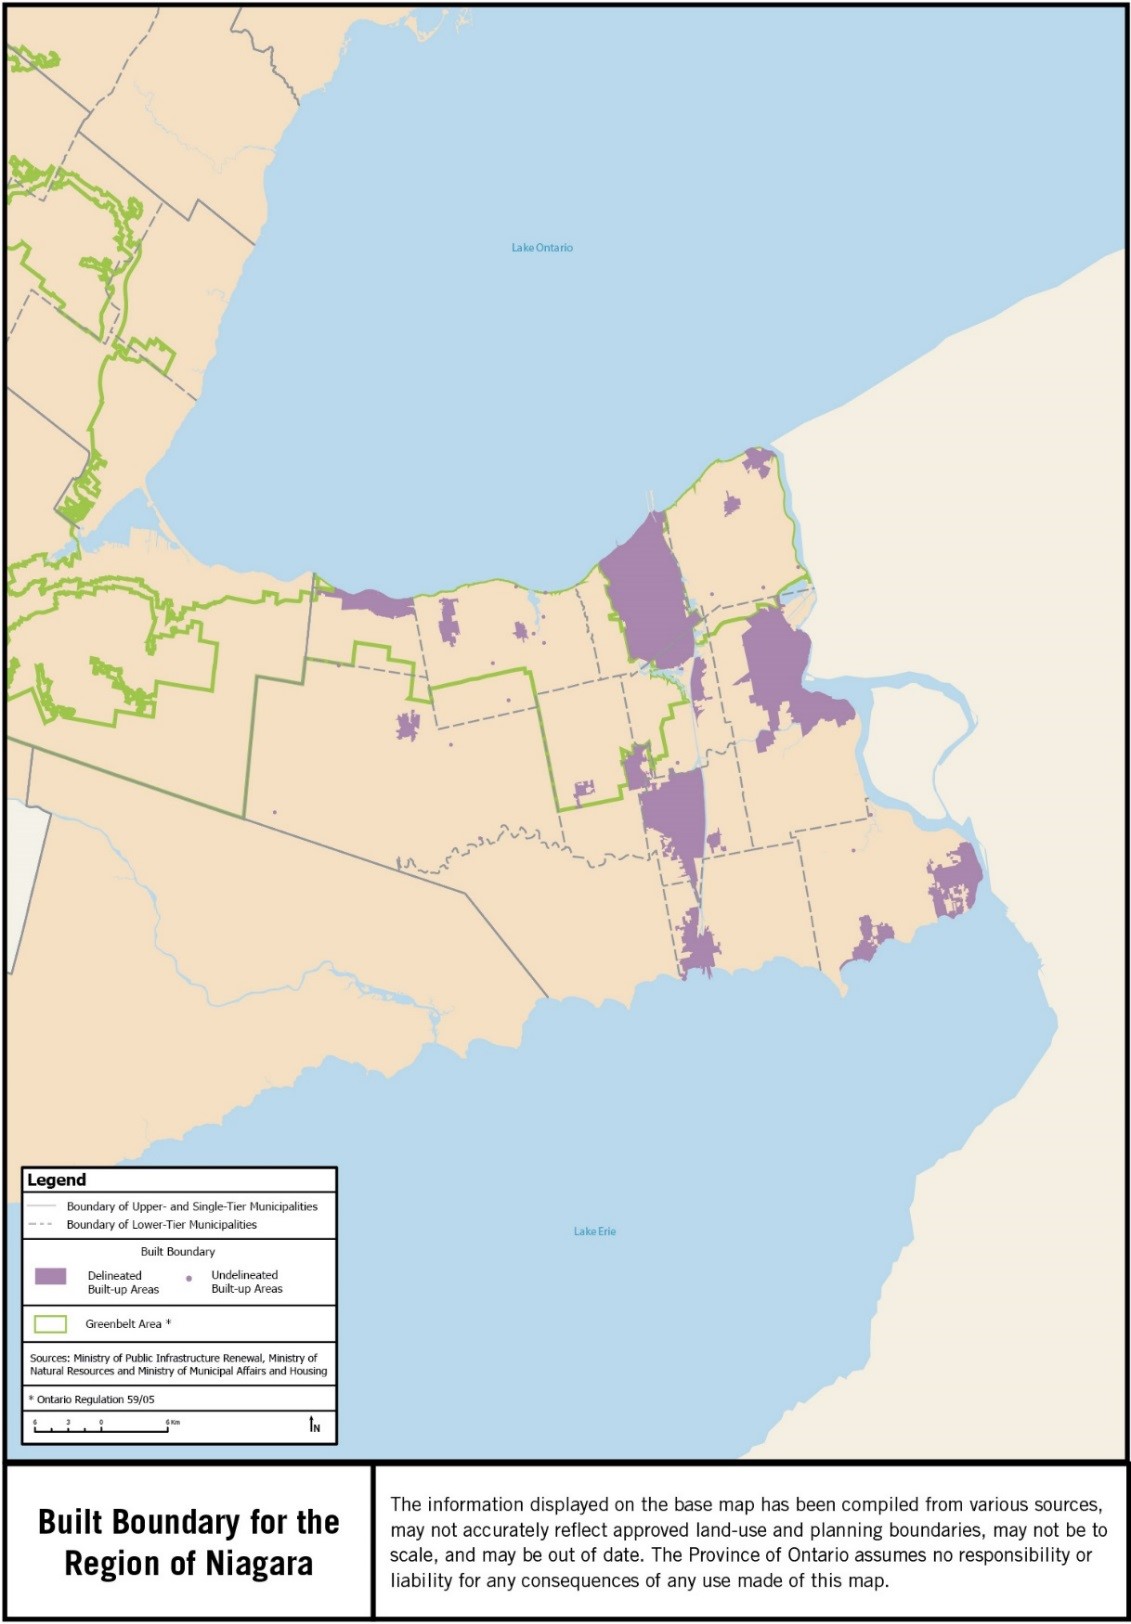 Map showing the built boundary for the Region of Niagara.